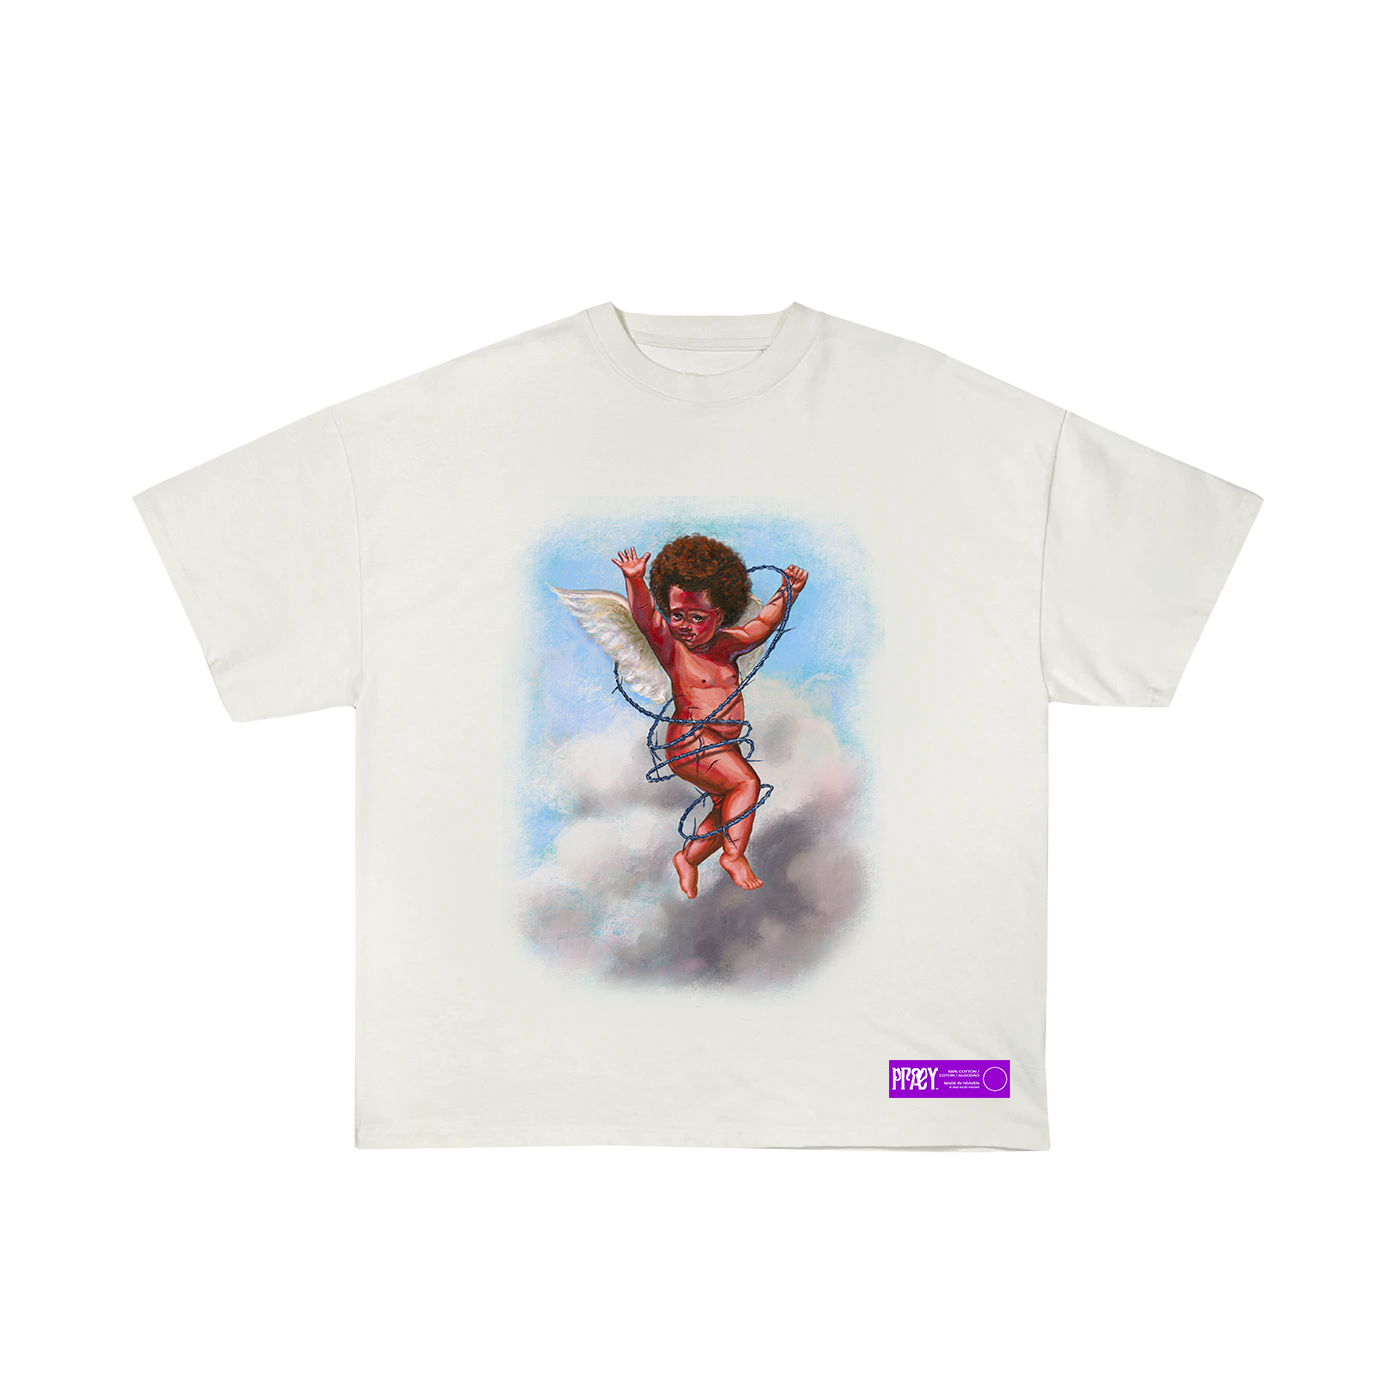 Barbed Angel T-Shirt